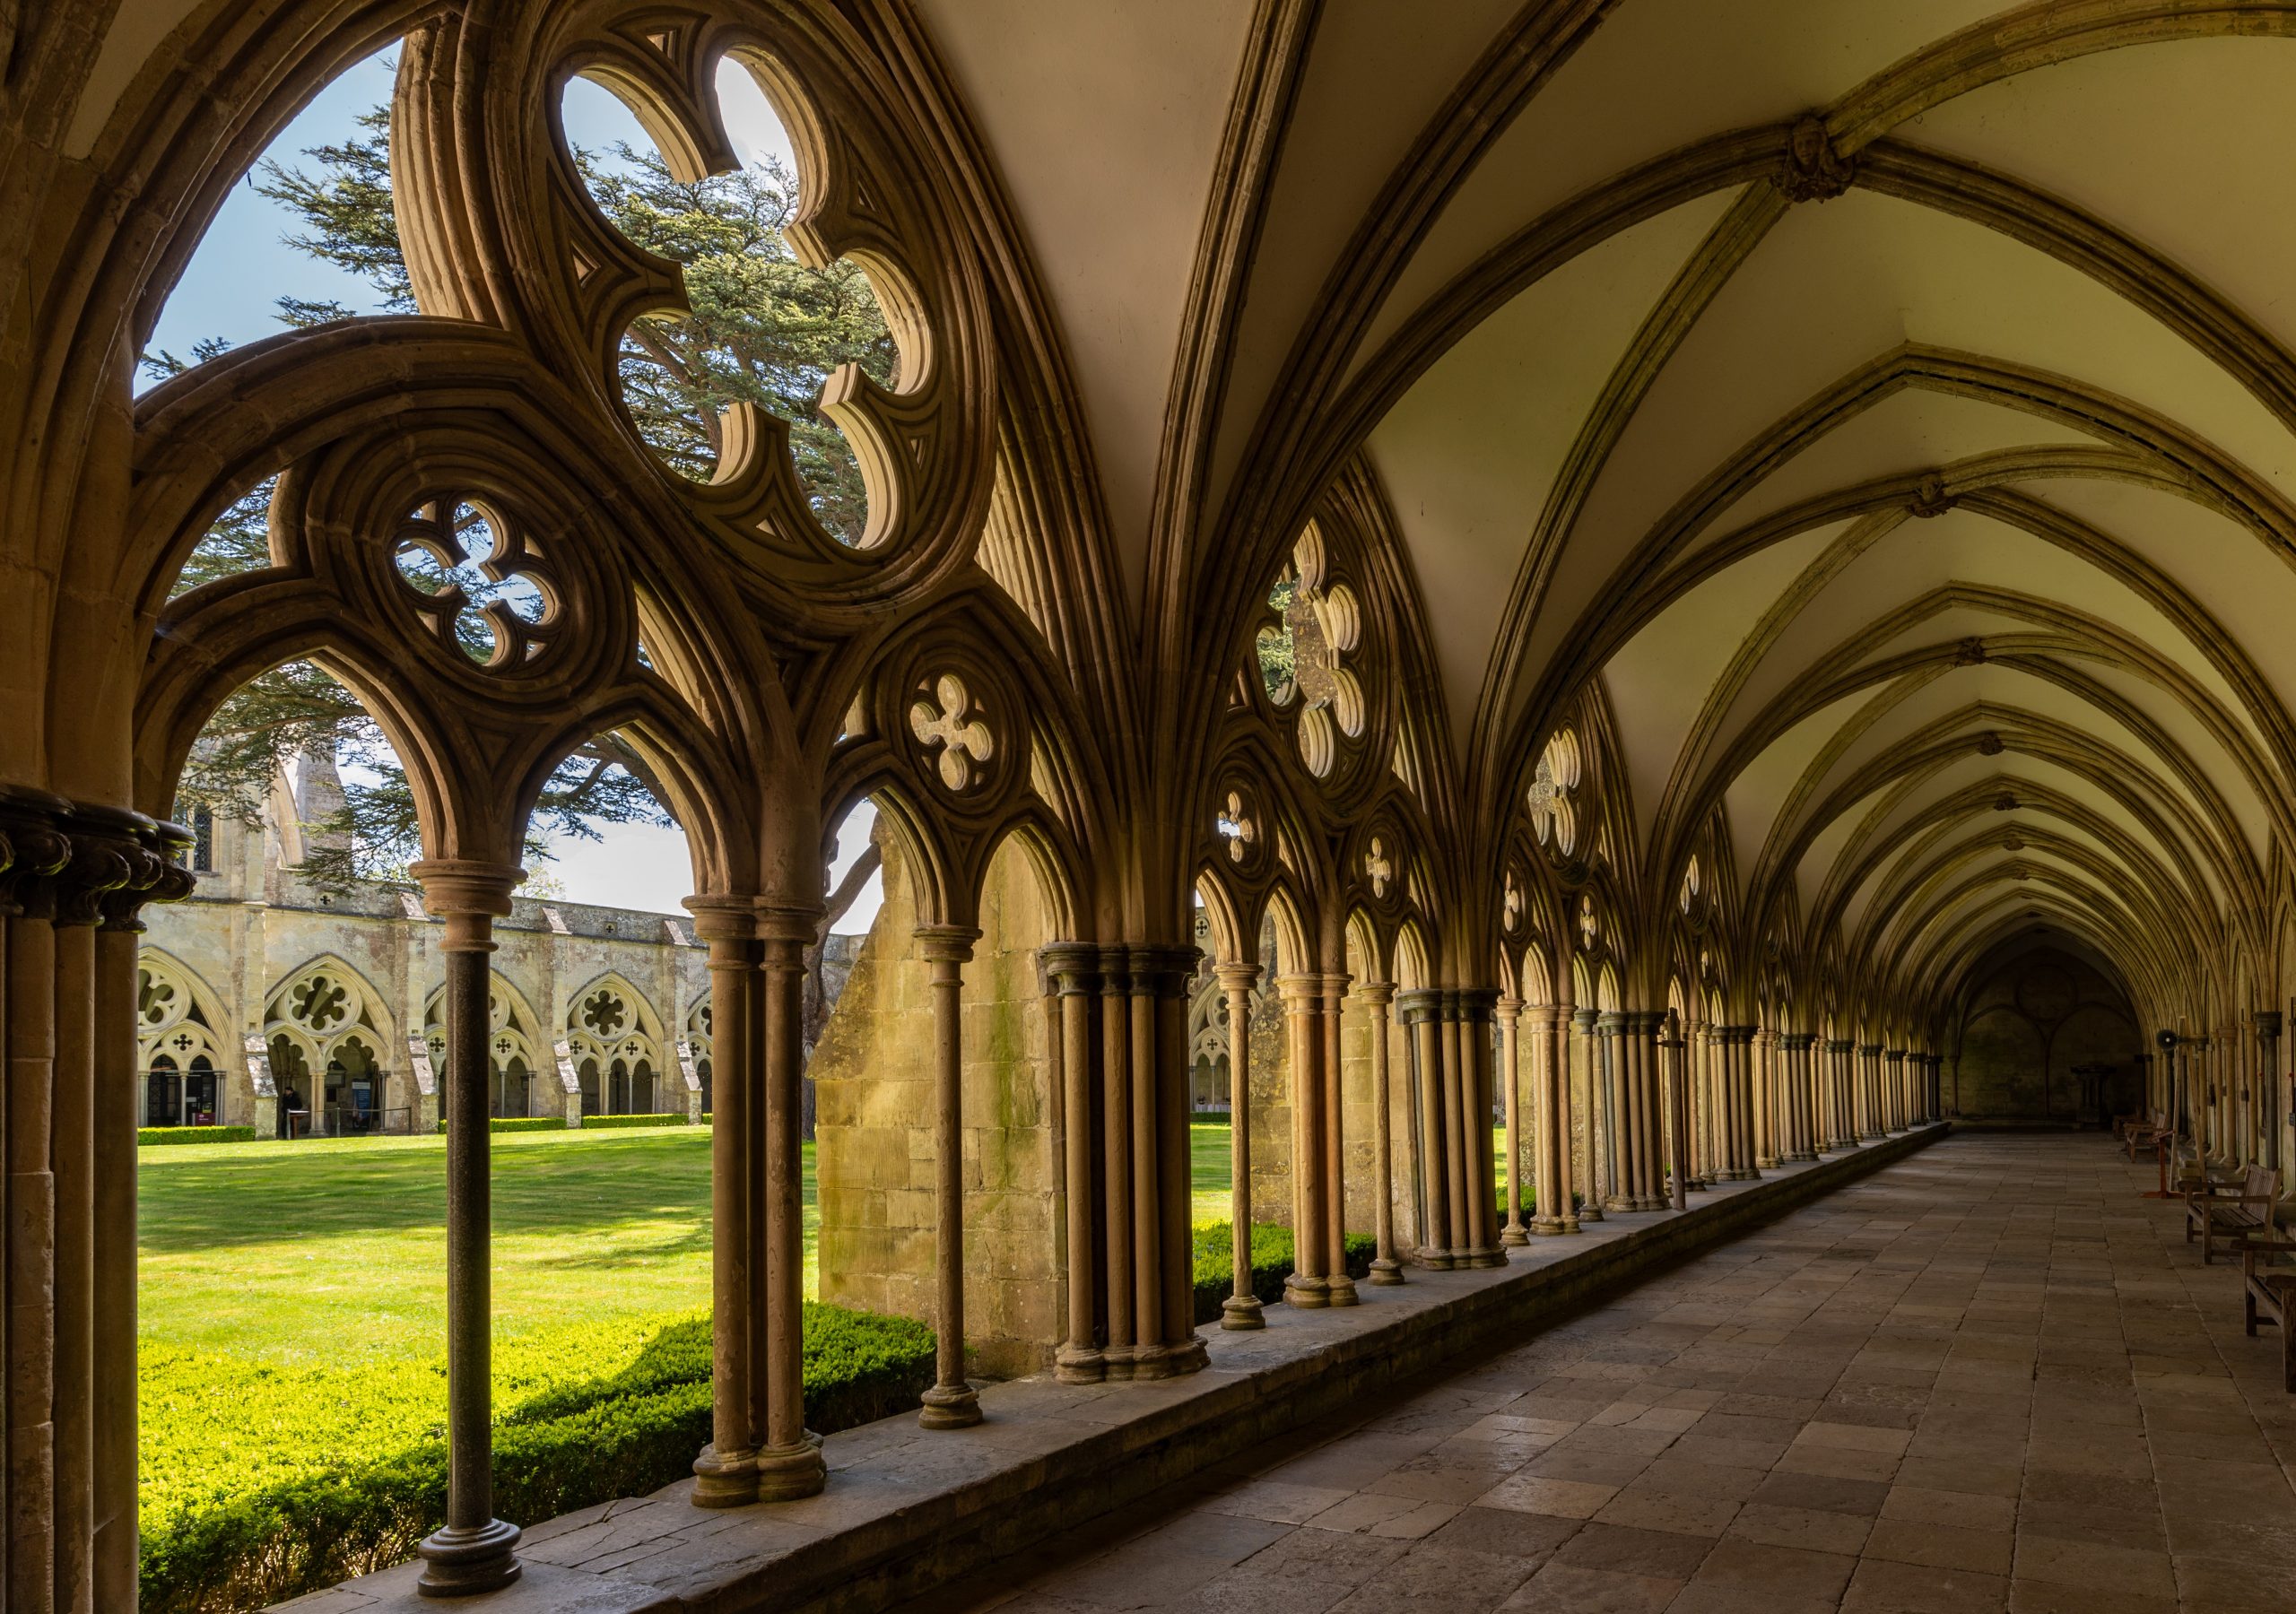 A side view of our Cathedral Cloisters